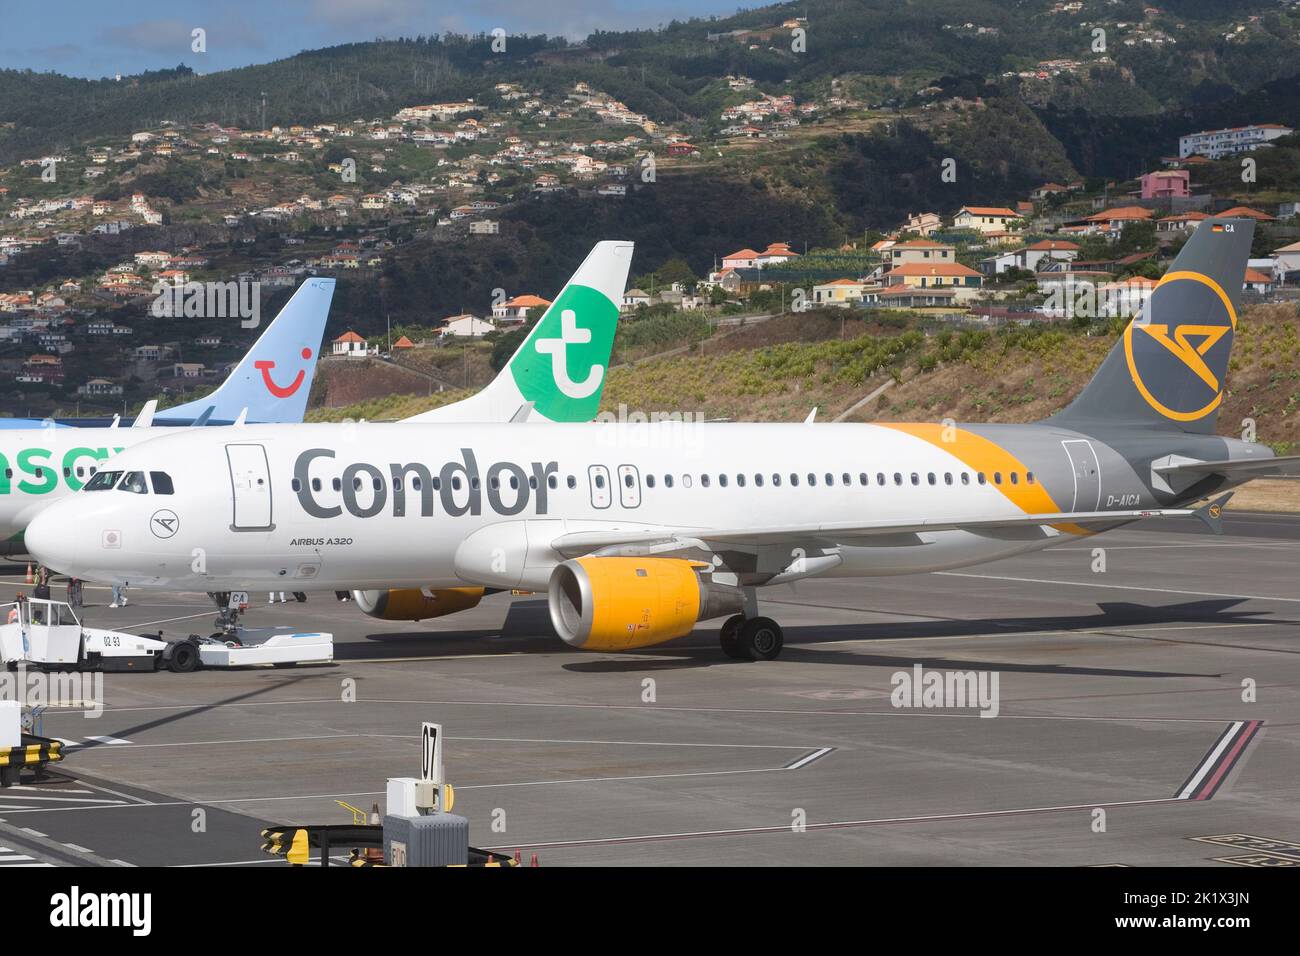 Condor Airbus A320 and other aircraft at Funchal airport Stock Photo